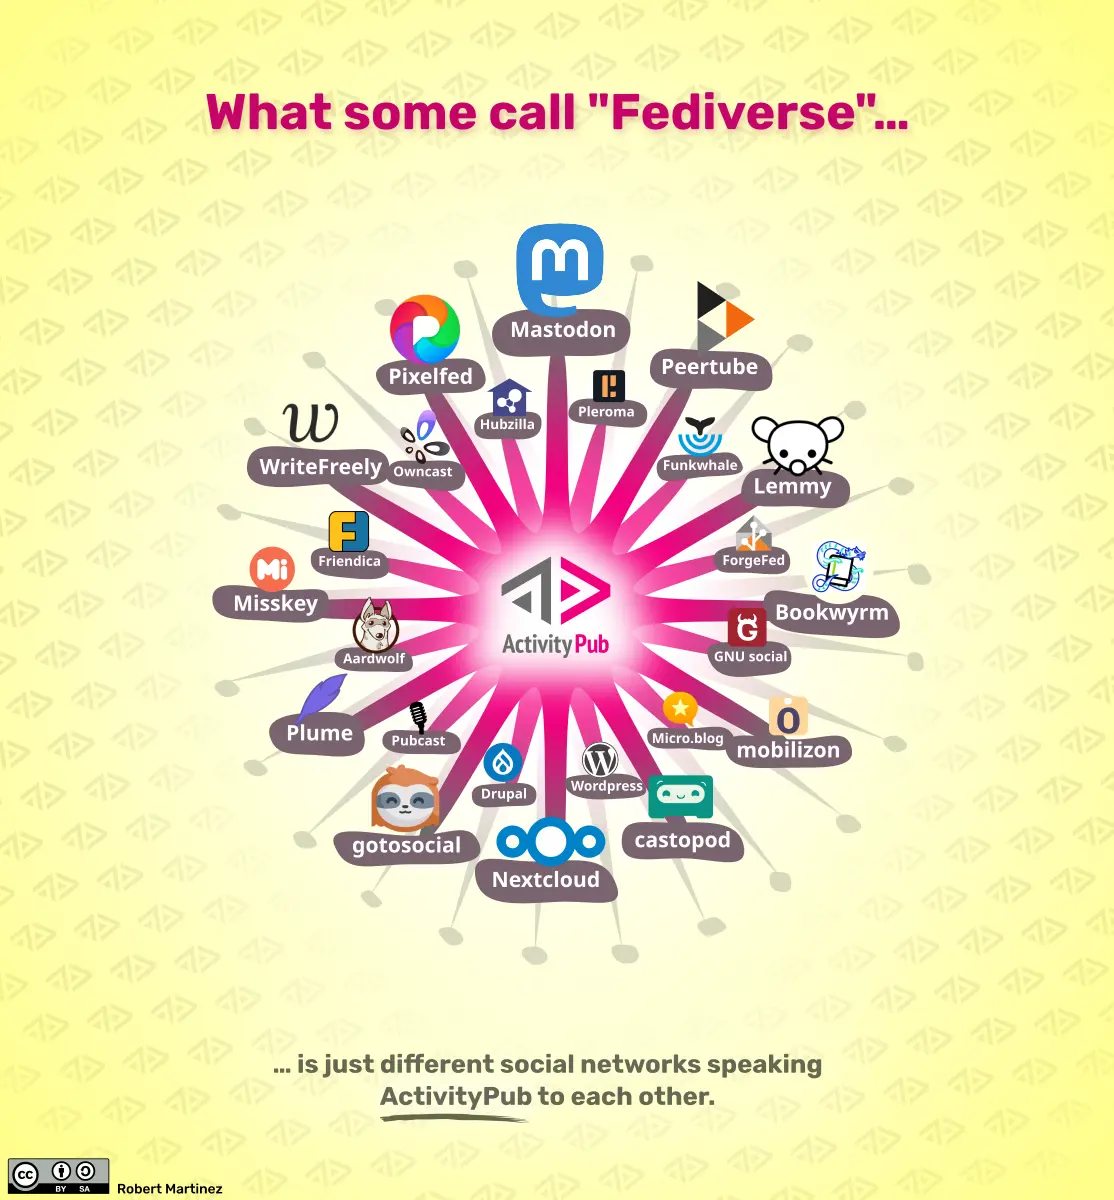 The Fediverse includes Pixelfed, Mastodon, Misskey, Plume, Nextcloud, Castopod, Bookwyrm, and much more.